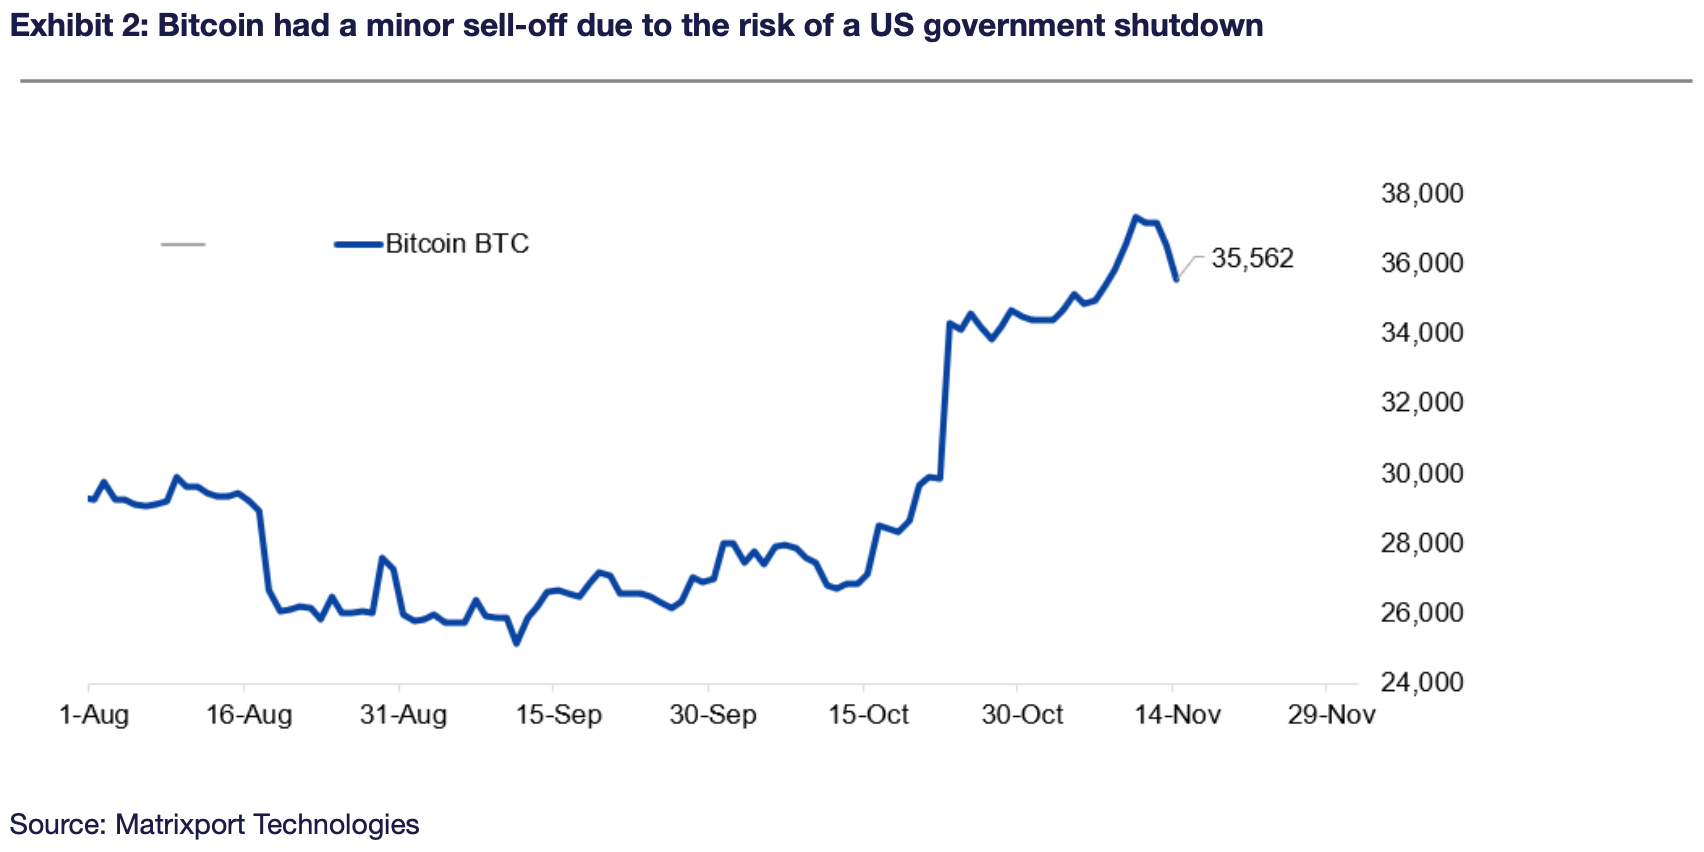 Exhibit 2: Bitcoin had a minor sell-off due to the risk of a US government shutdown